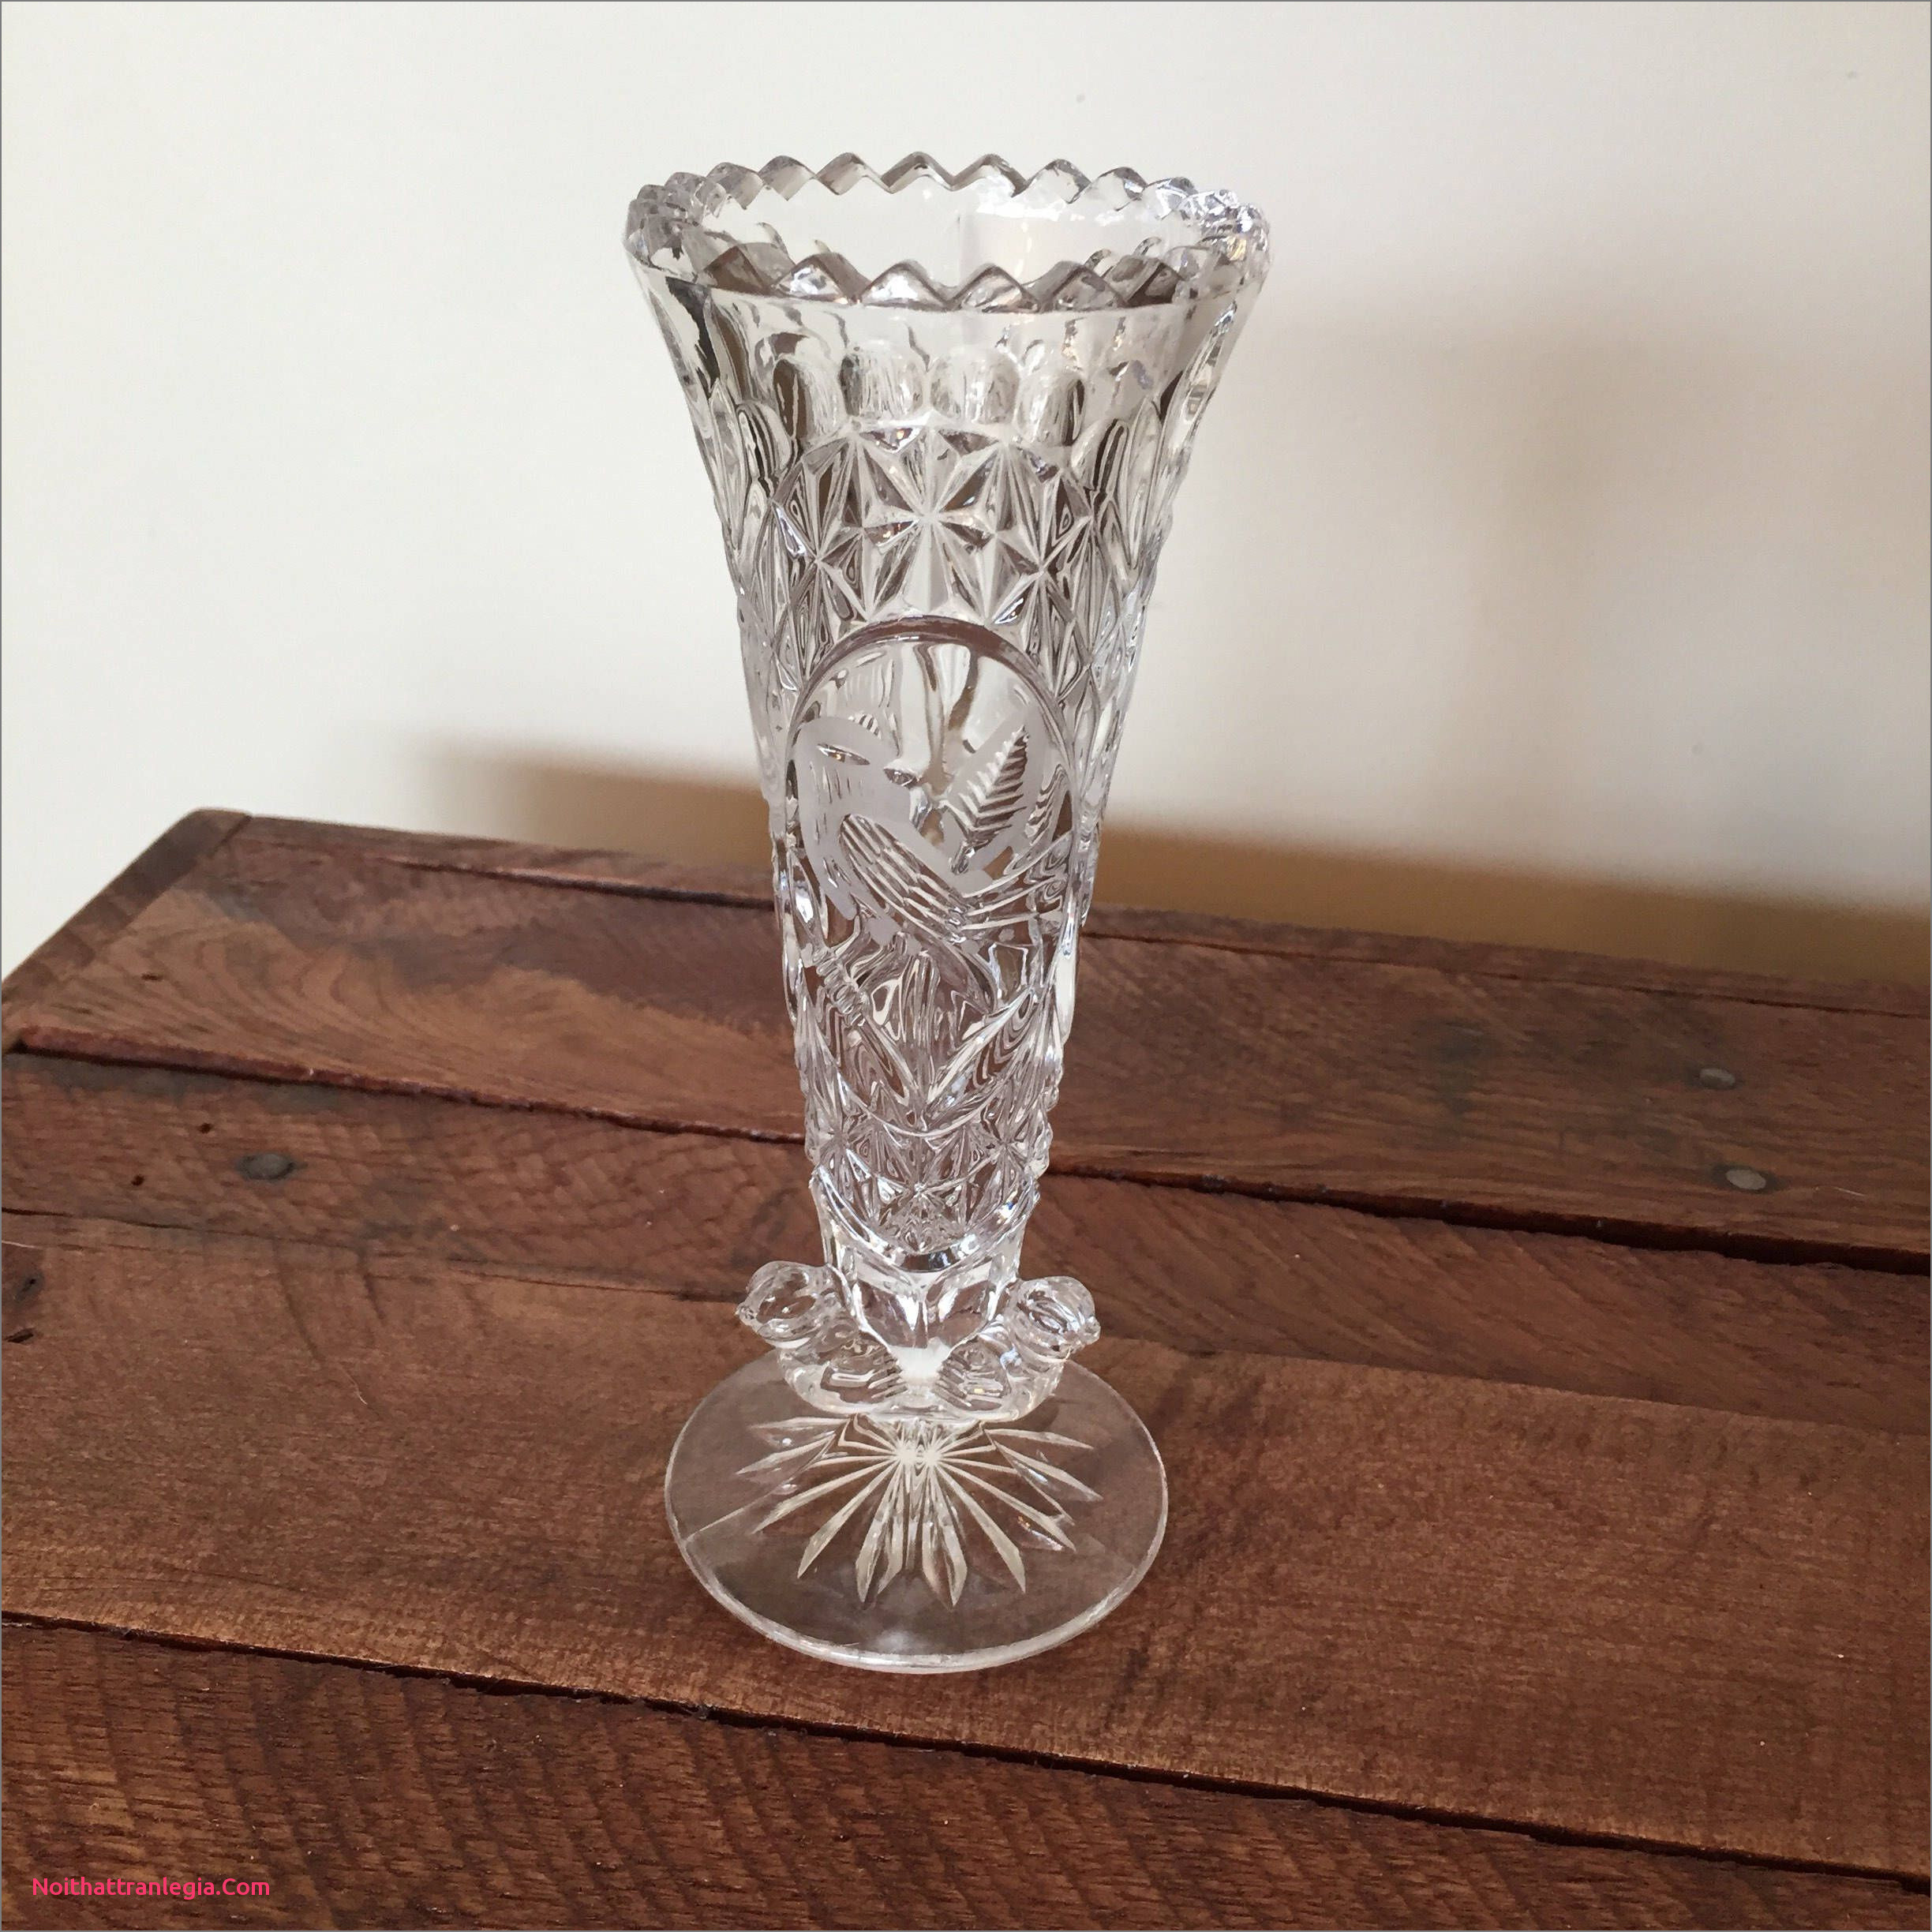 14 Ideal Mini Clear Glass Bud Vases 2024 free download mini clear glass bud vases of 20 cut glass antique vase noithattranlegia vases design pertaining to vintage cut glass bird vase etched glass vase three glass birds perched on vase crystal bi